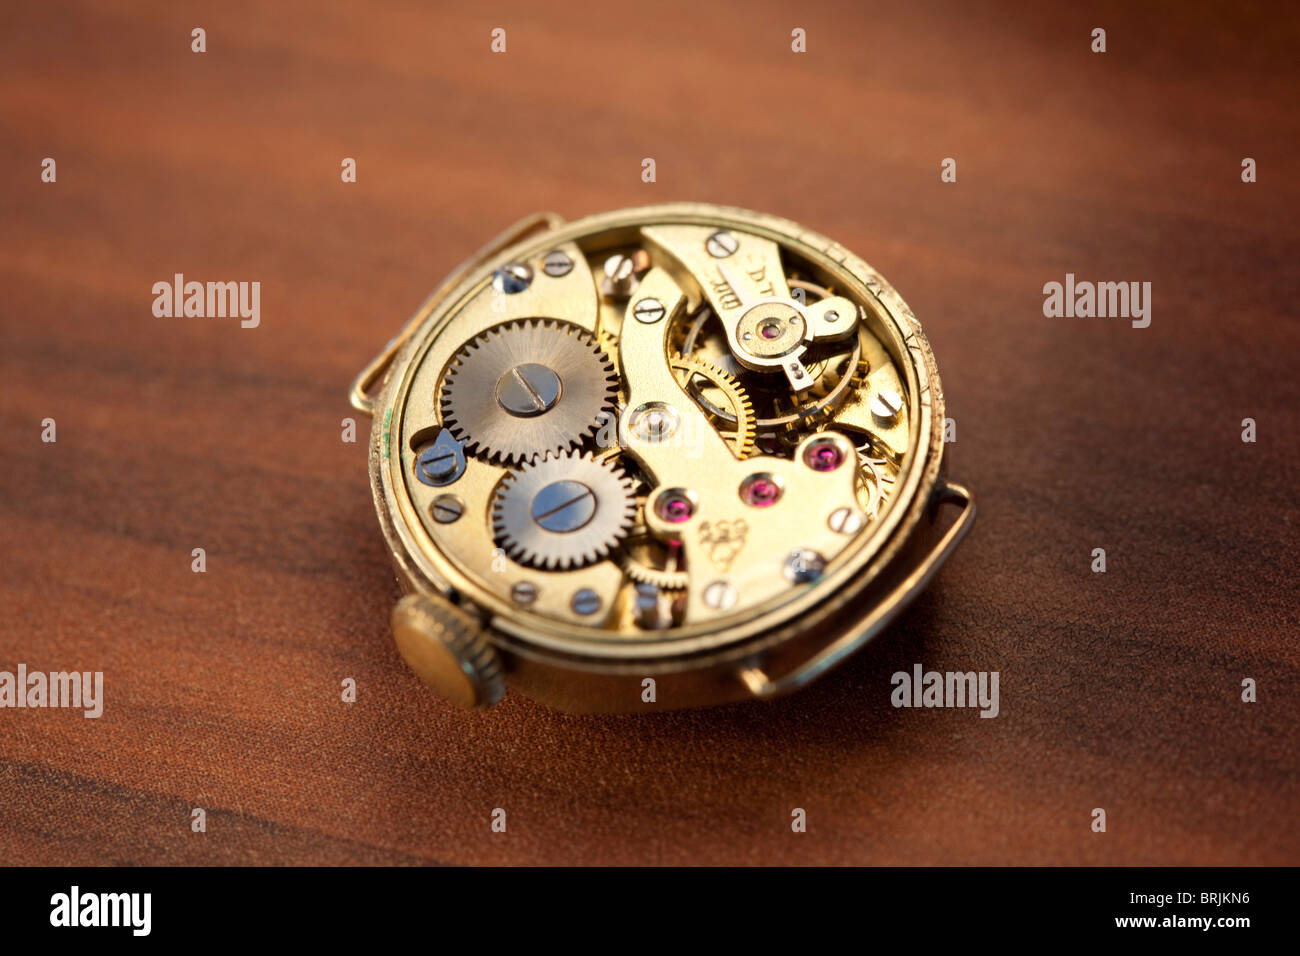 Interior of a Watch Stock Photo